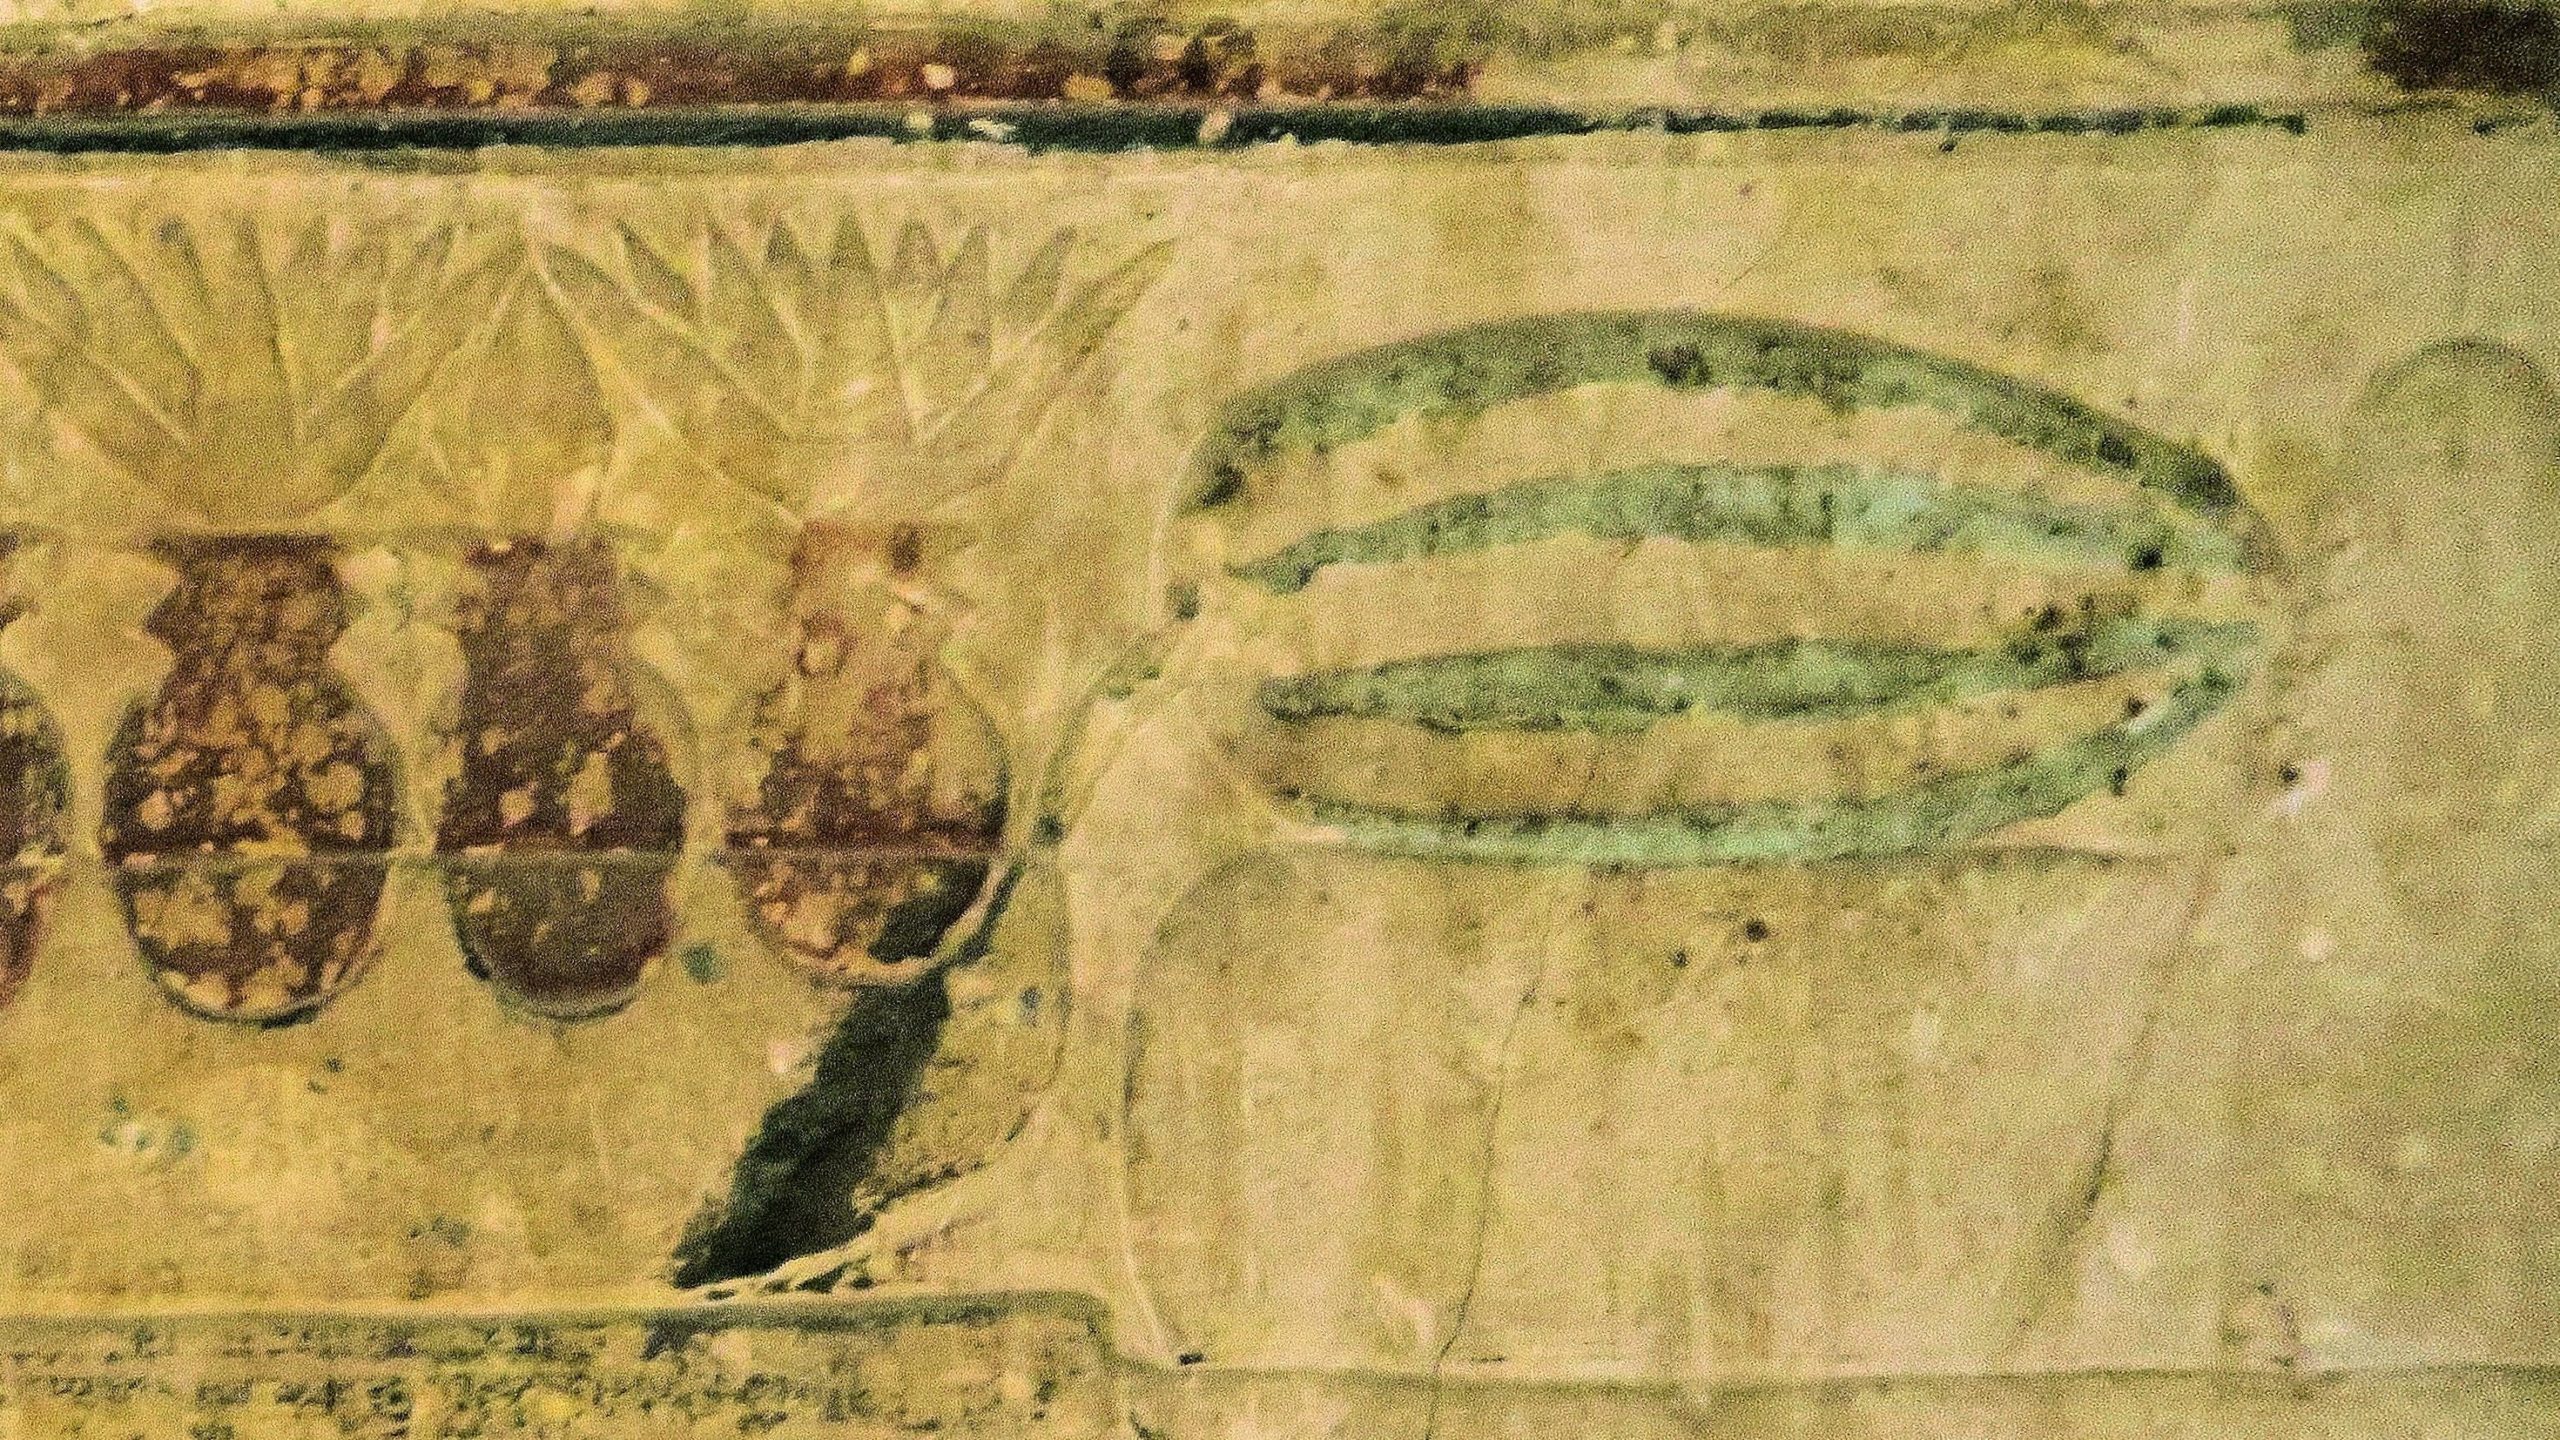 Iconography in an Egyptian tomb depicted a melon of unknown species. (Image: Lisa Manniche)